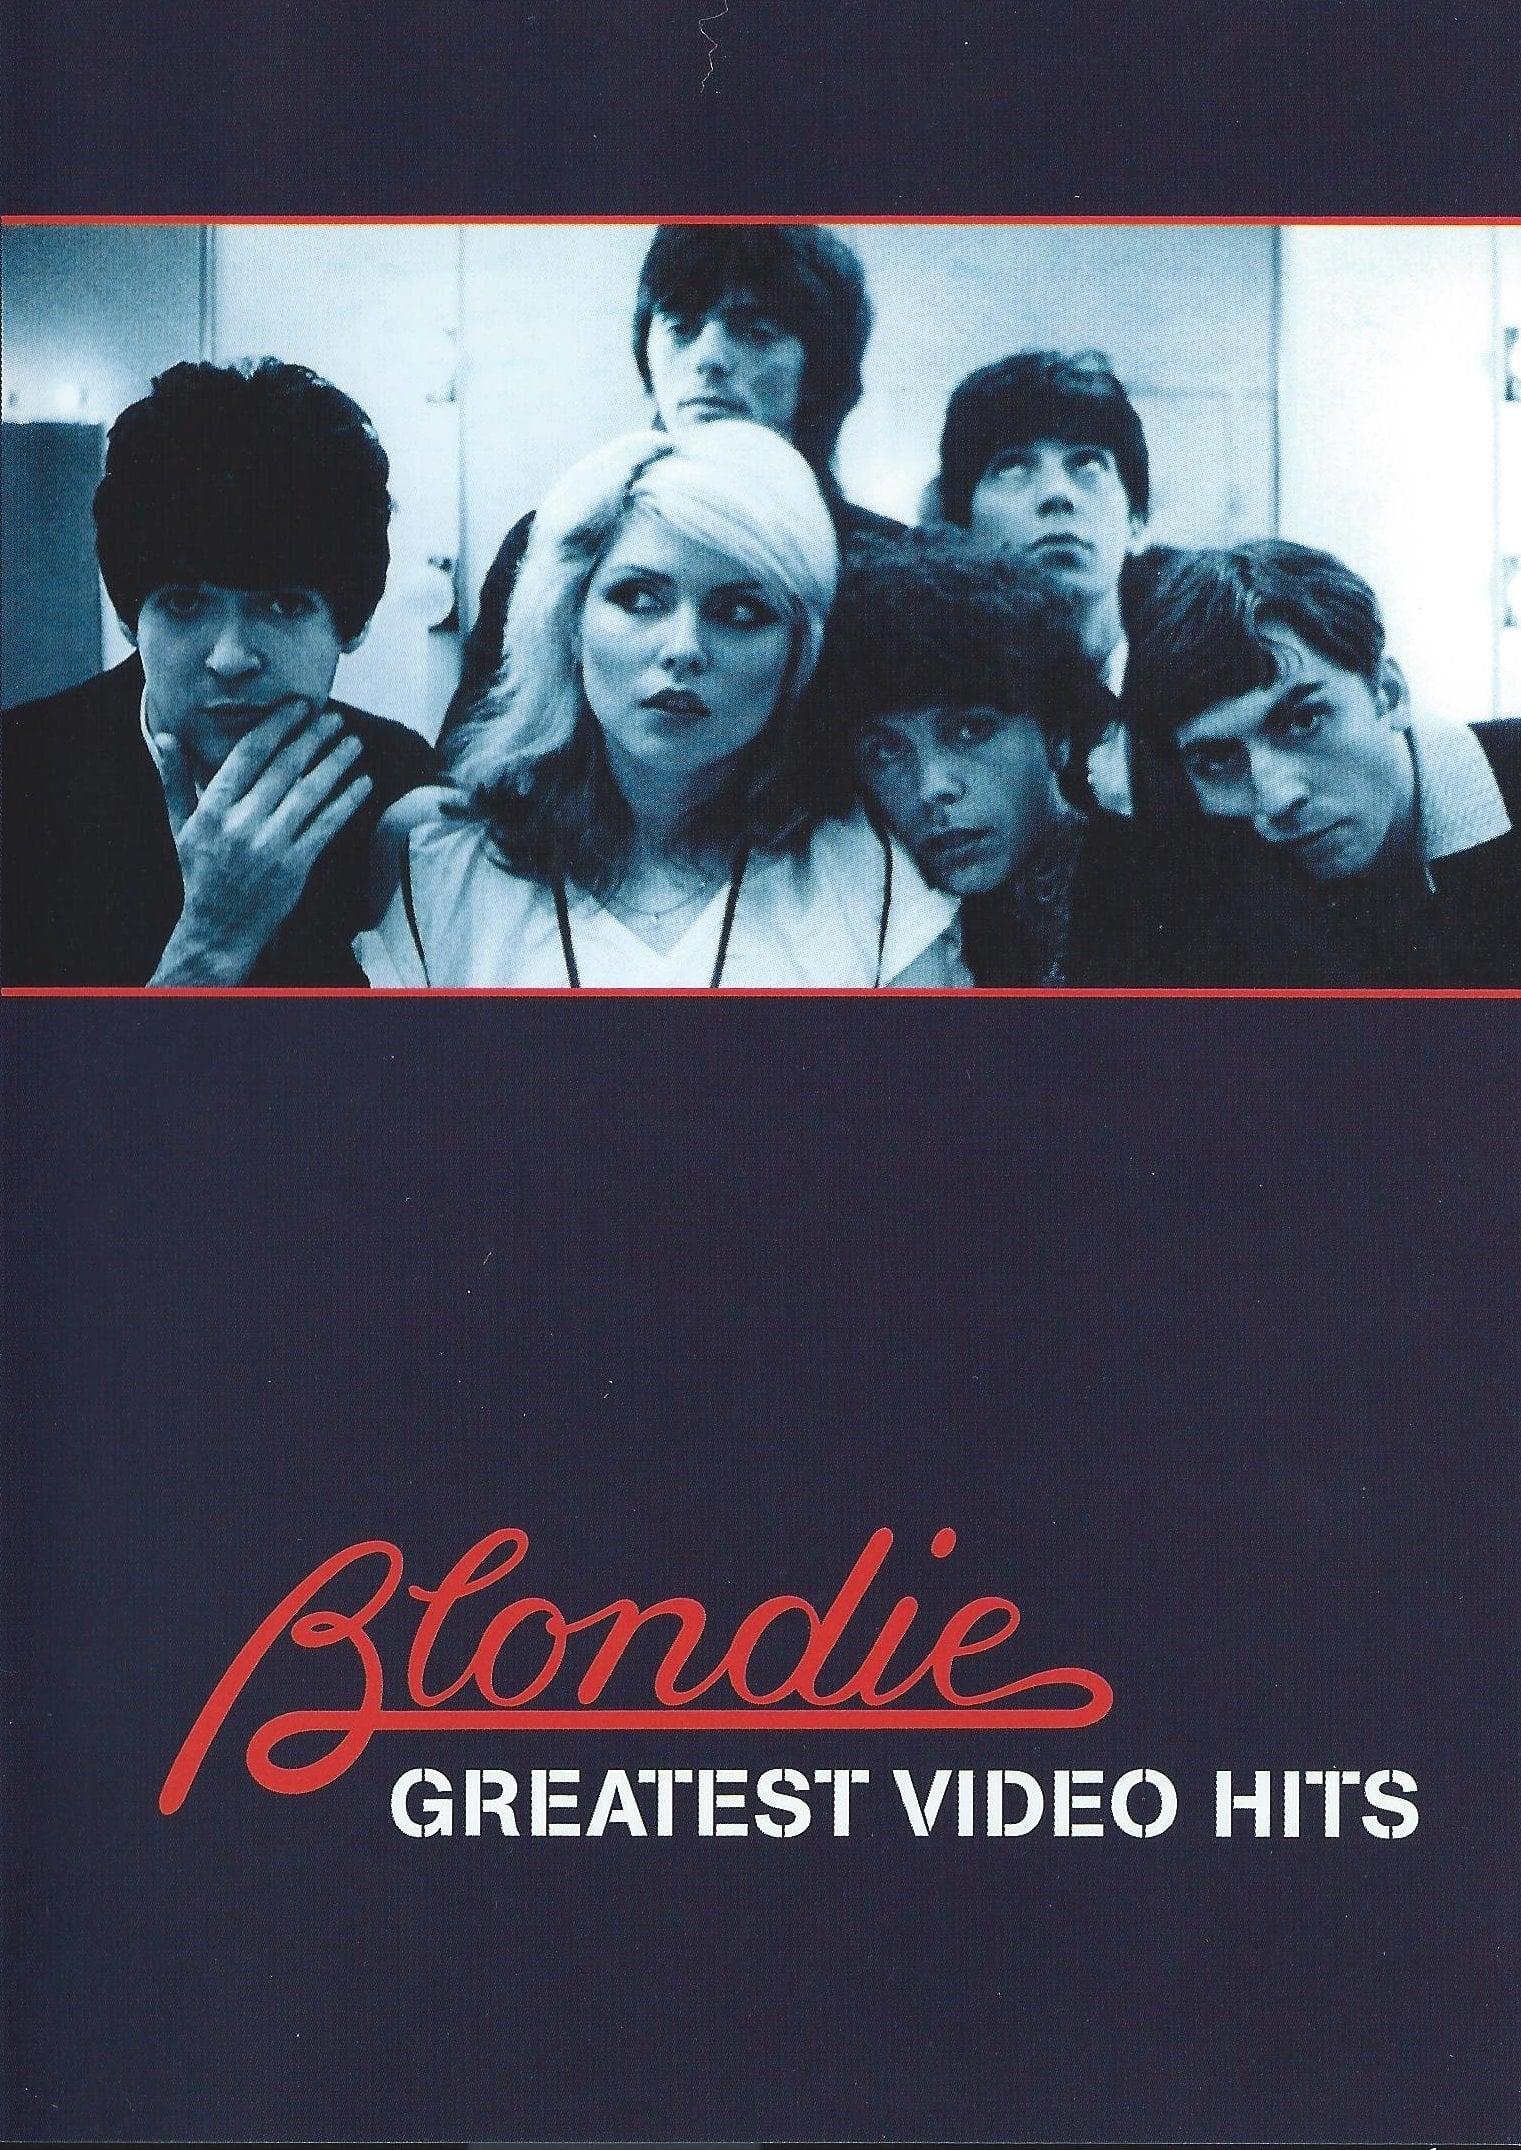 Blondie Greatest Video Hits poster